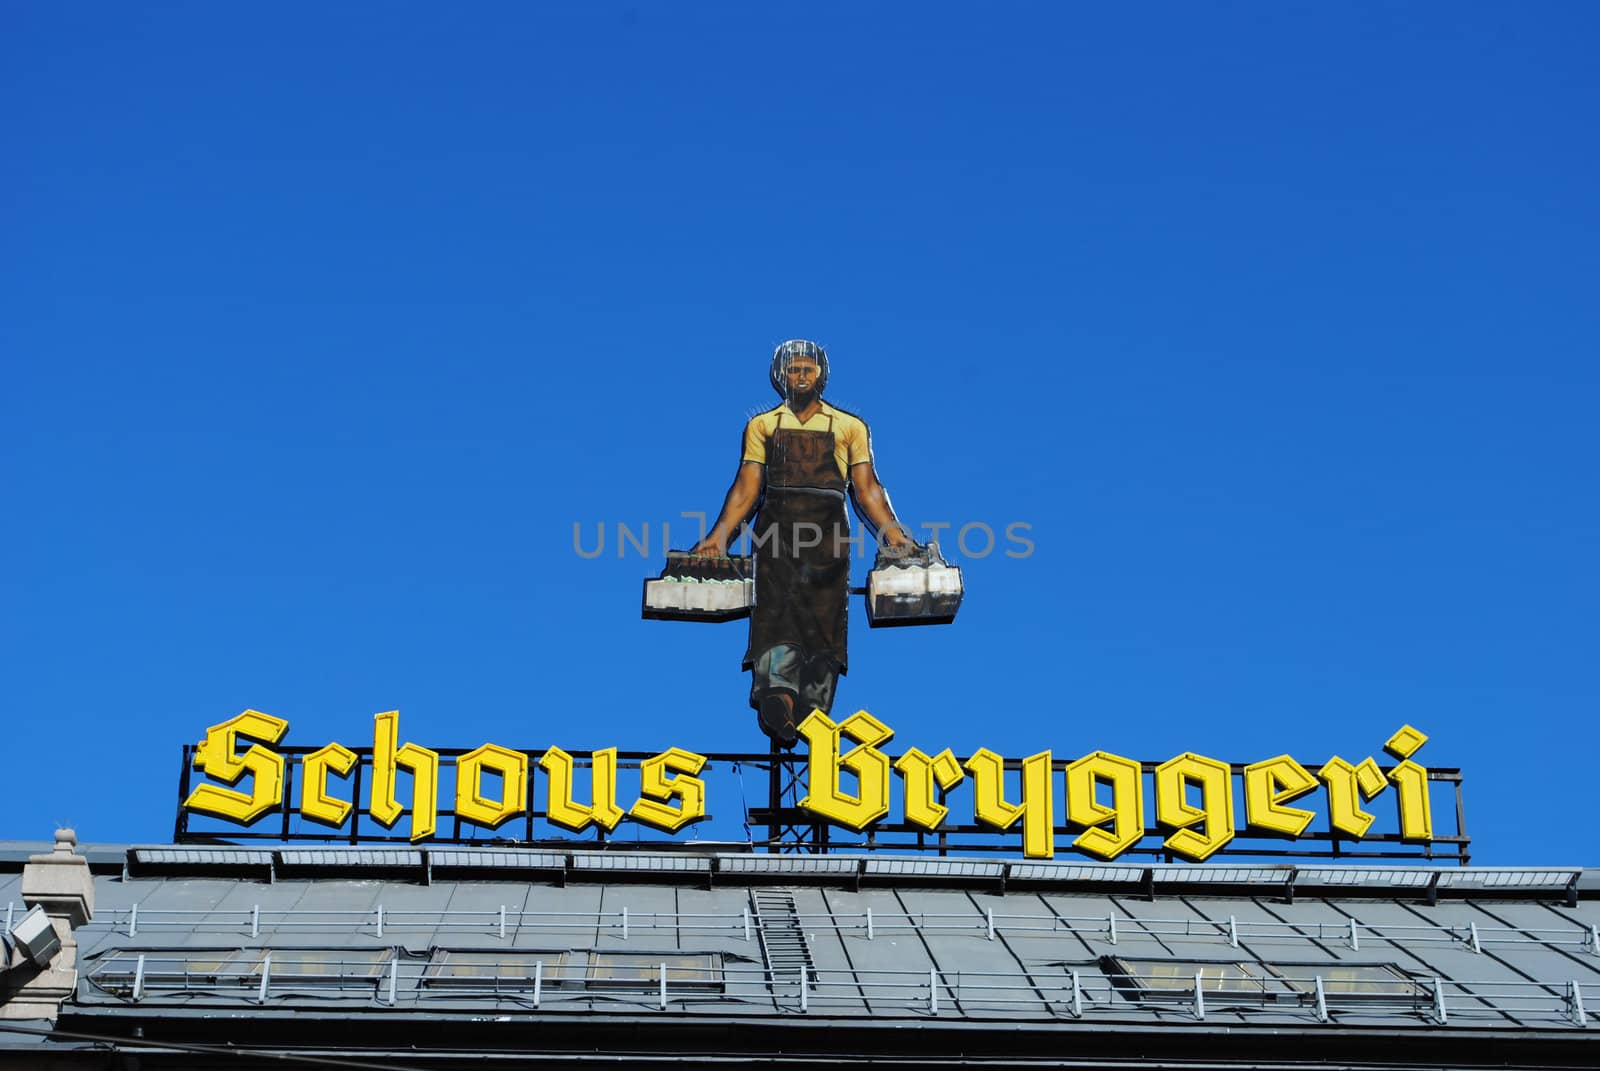 Rooftop advertisement for Schous Brewery. Schous is a norwegian brewery, founded in 1800, located at Grünerløkka, Oslo.